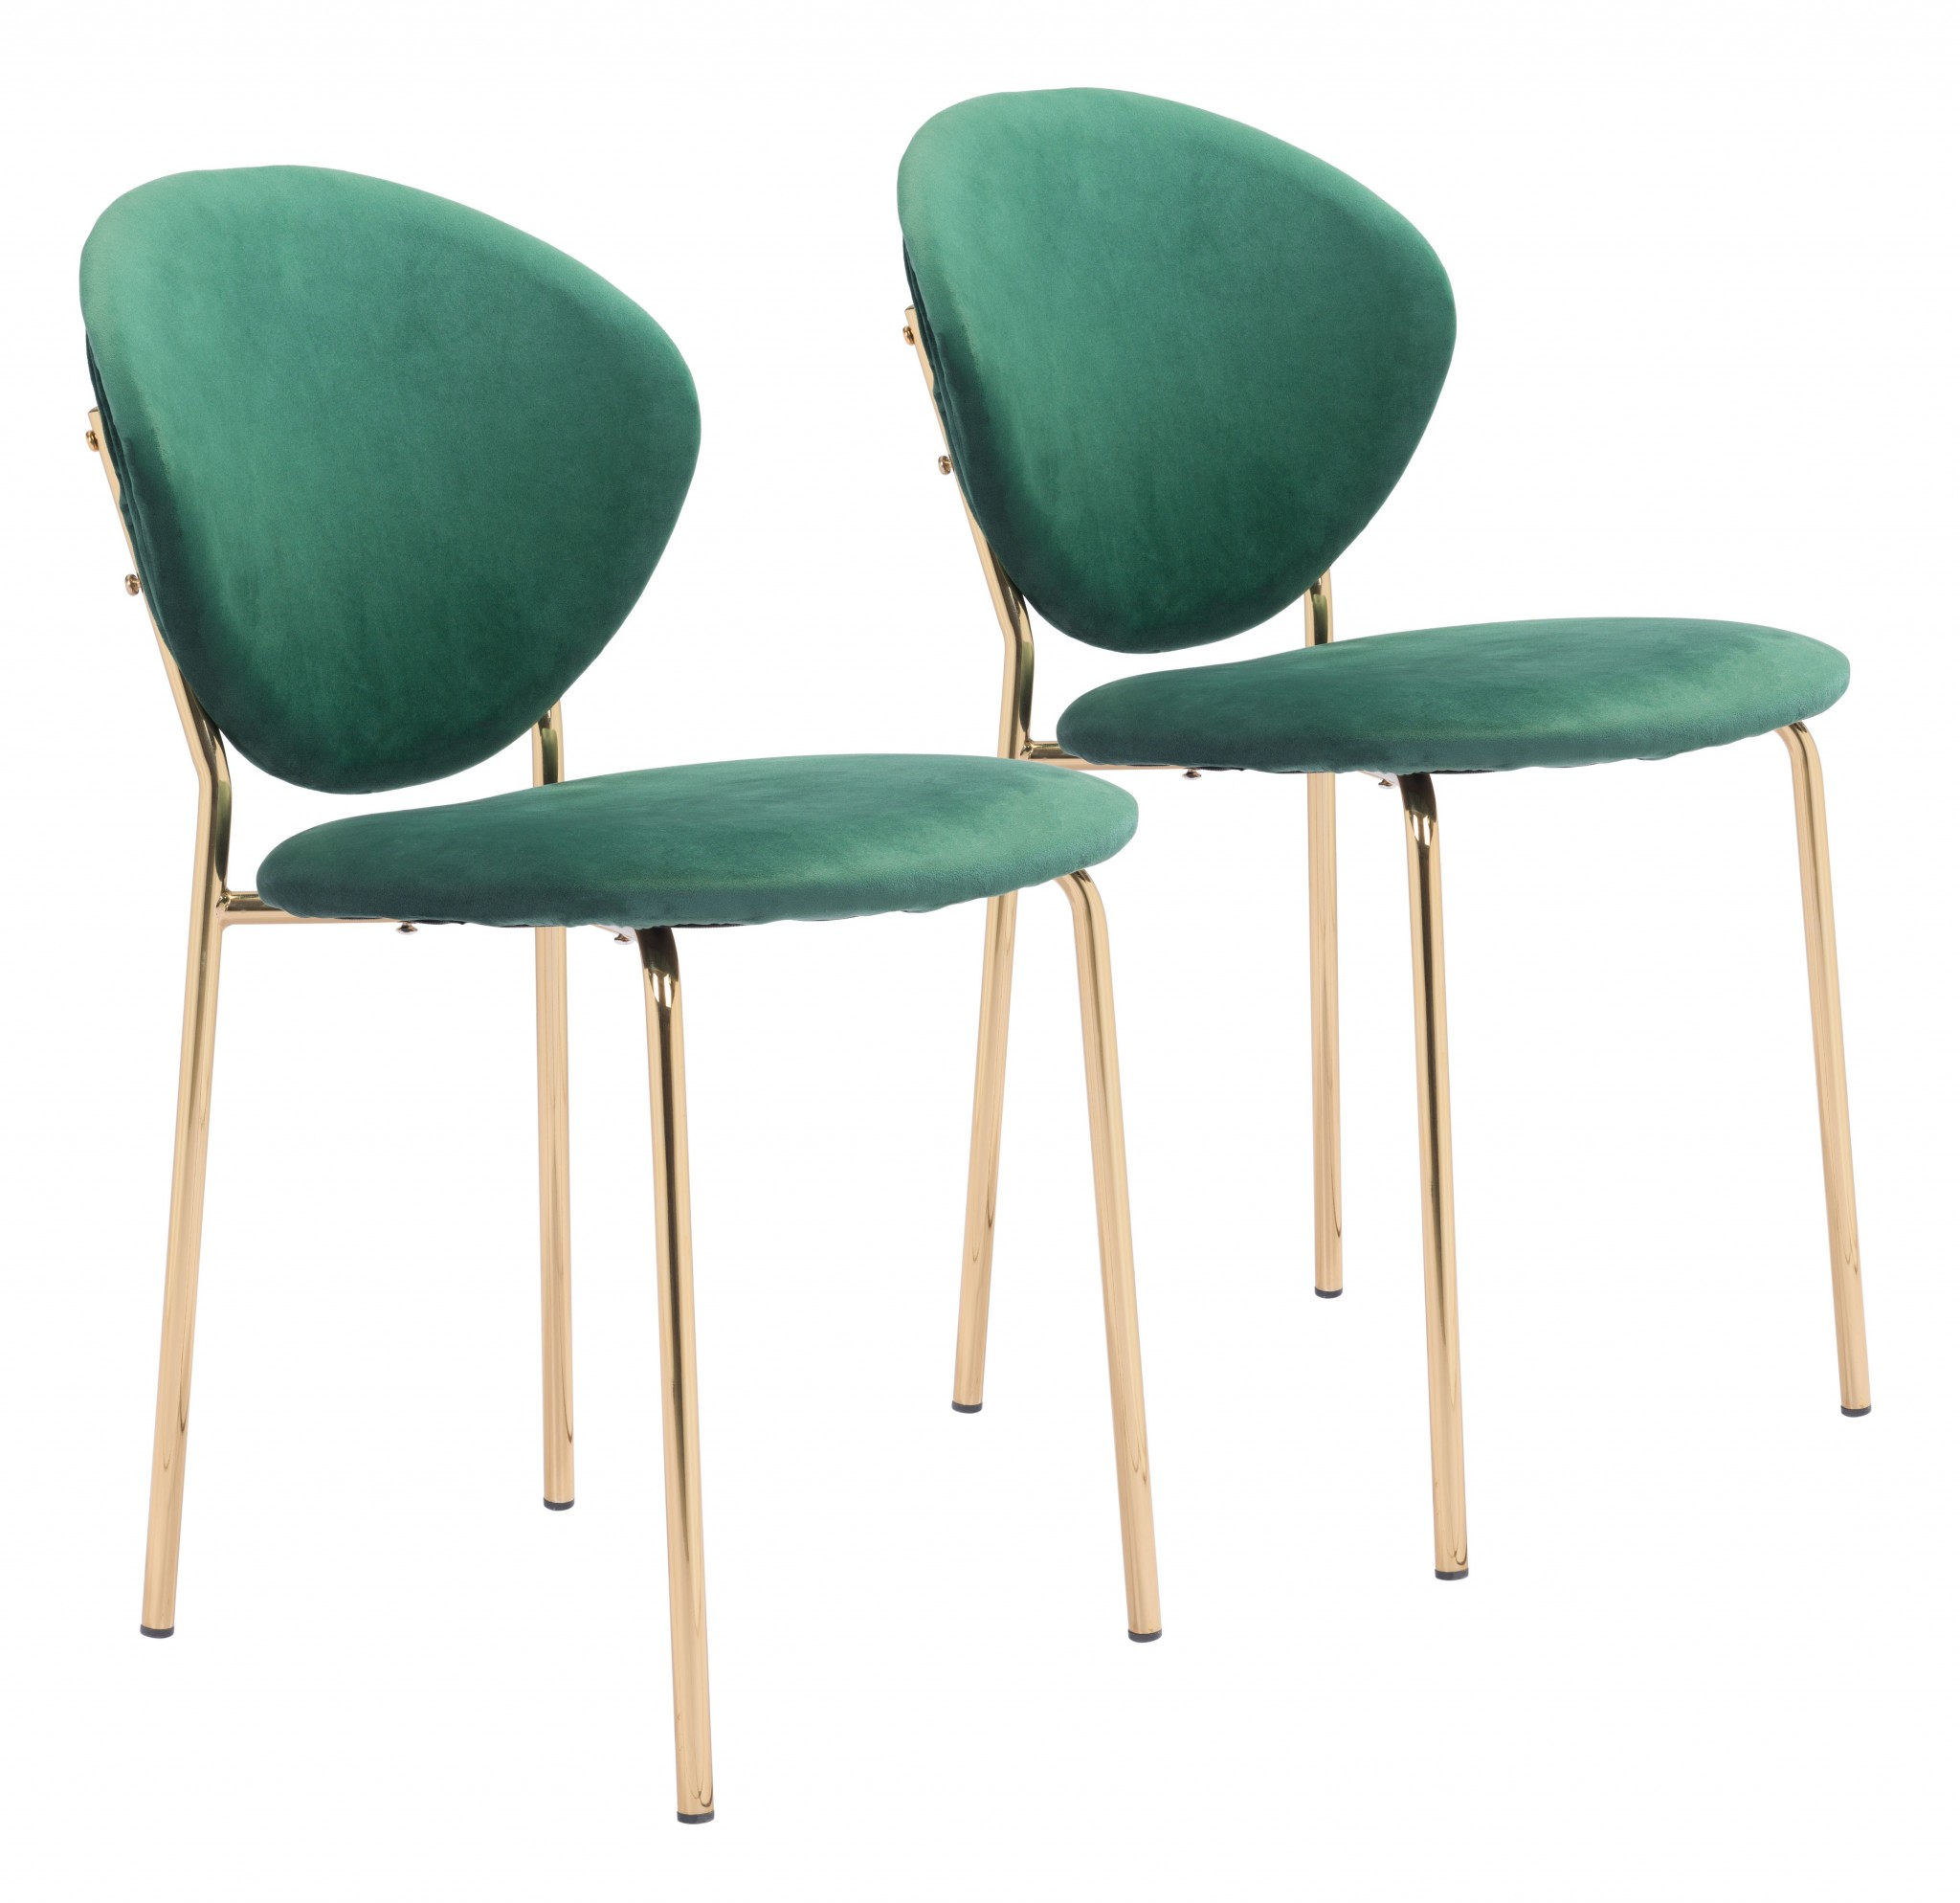 Set of Two Green and Gold Modern Dining or Side Chairs